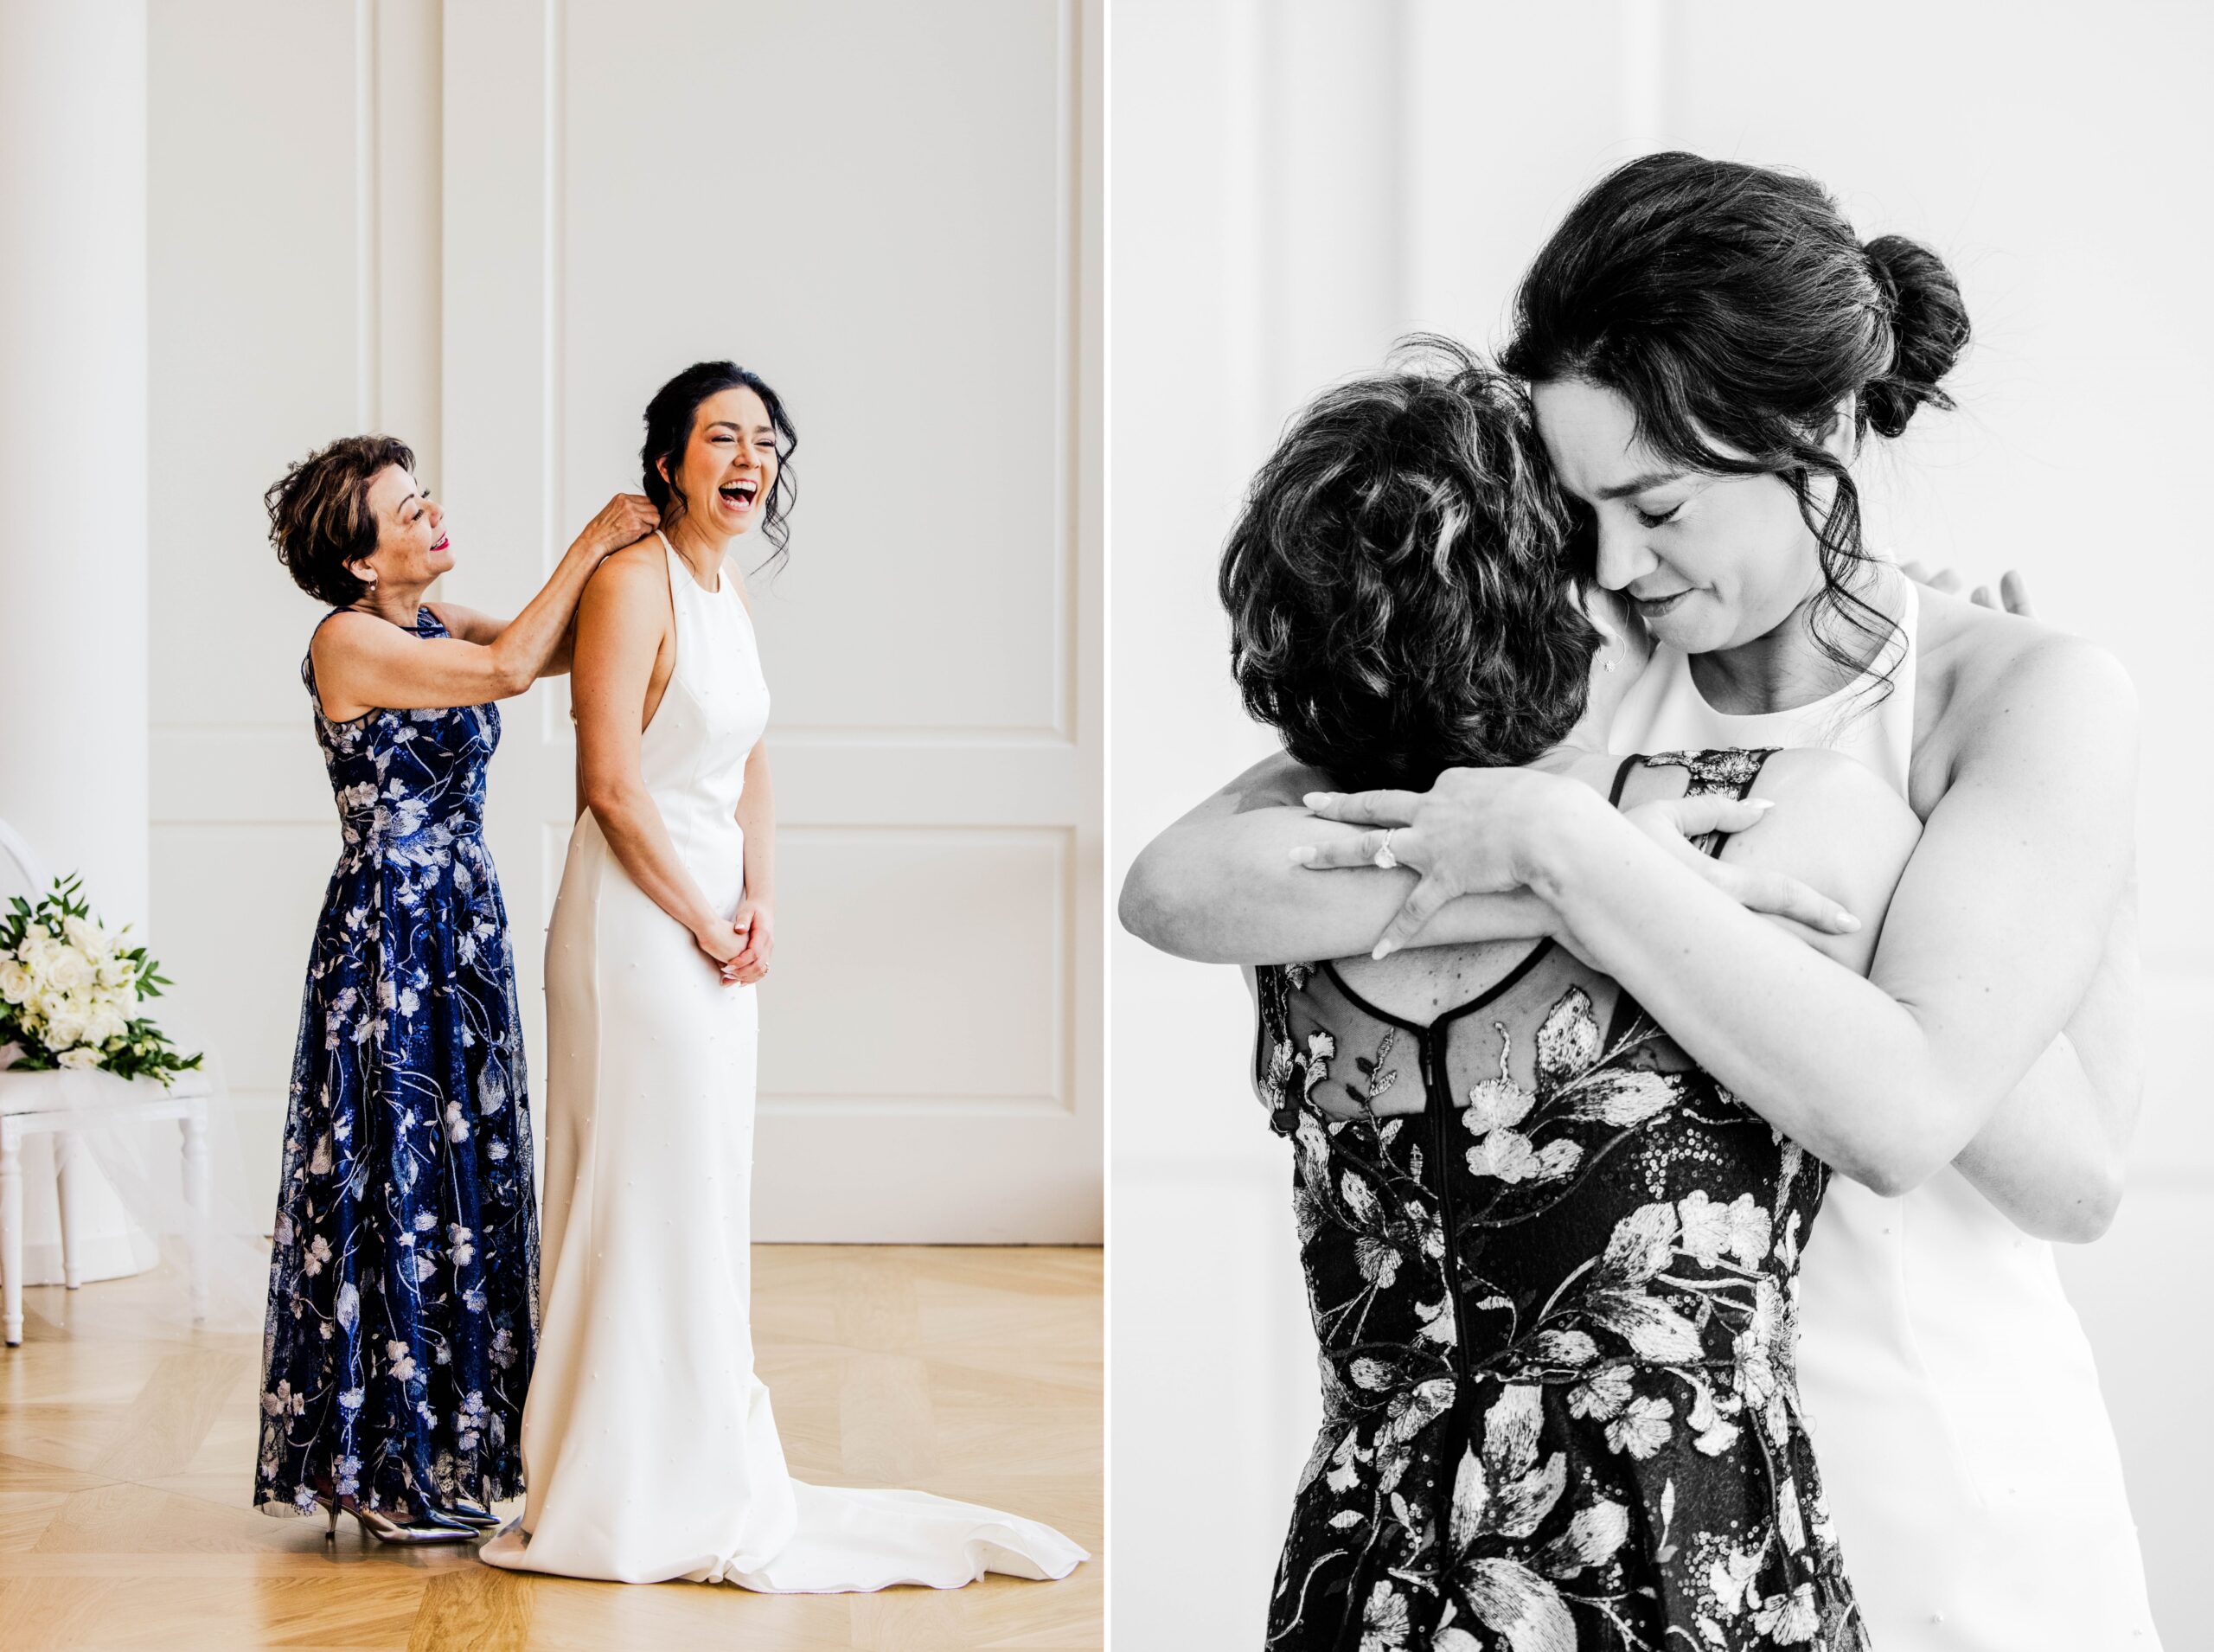 Bridal getting dressed with her mother showing a range of emotions